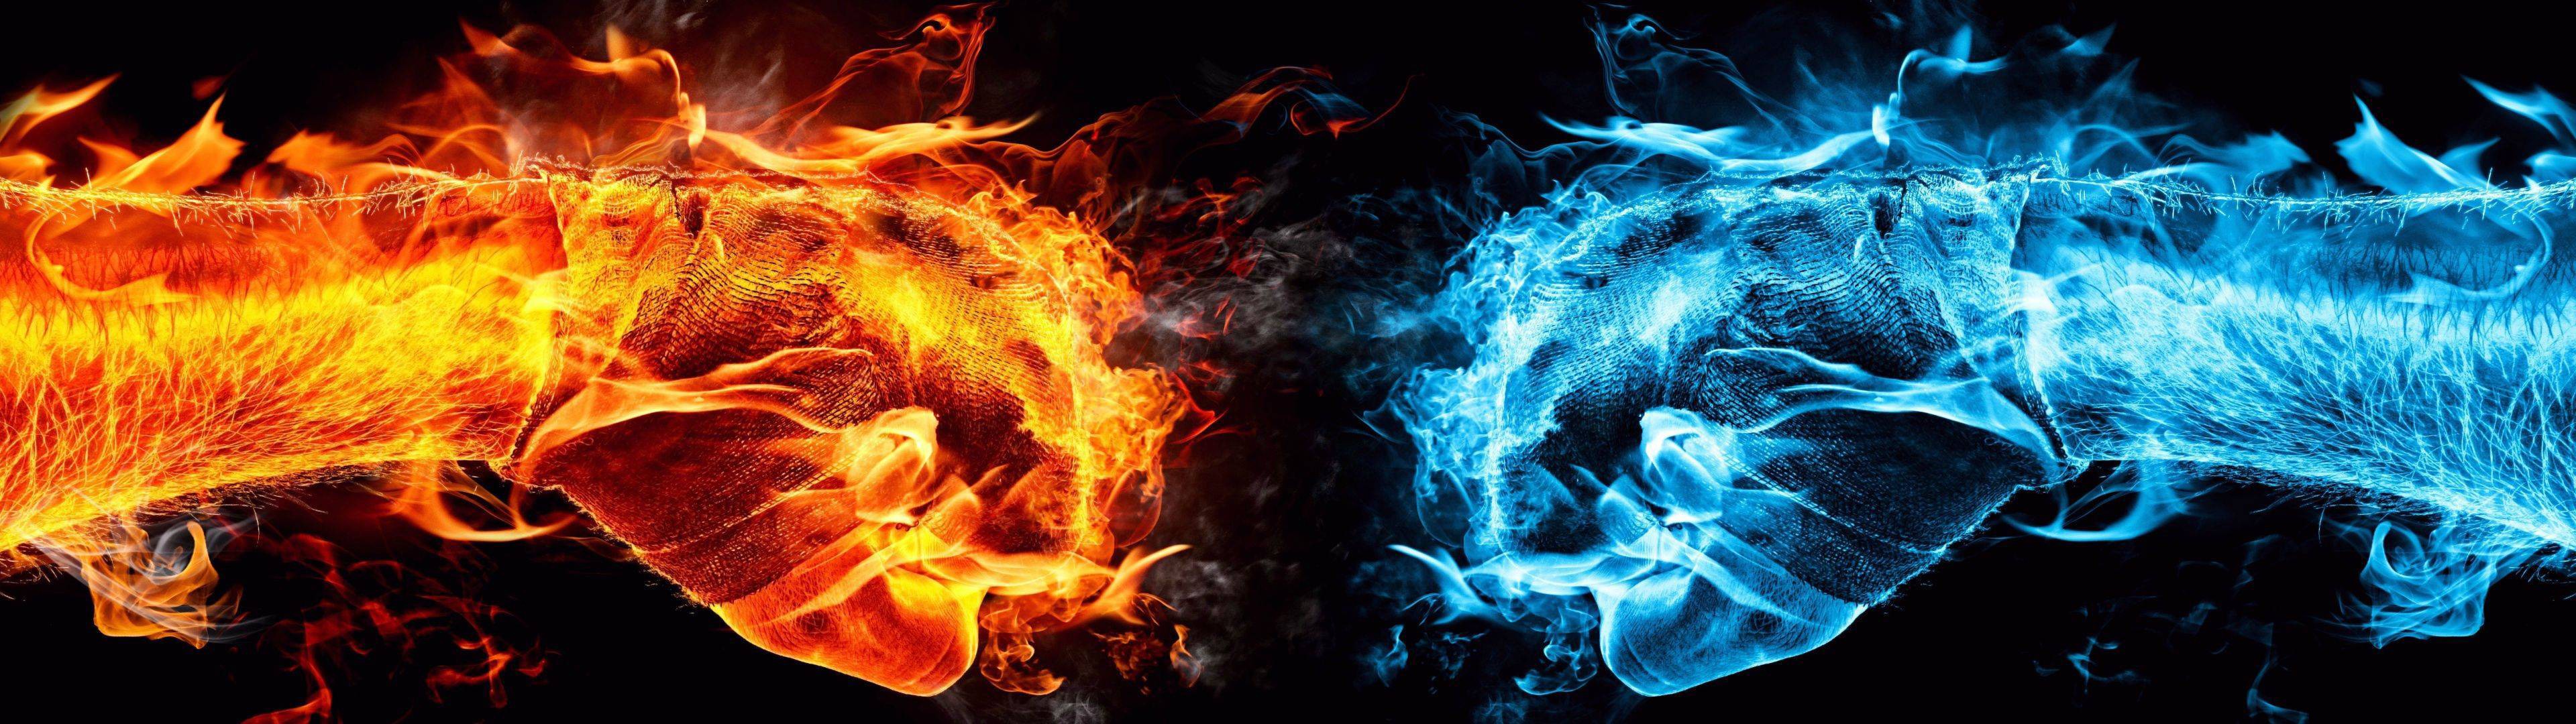 Anime Abstract Mortal Kombat Video Games Fists Fire Ice 3840x1080